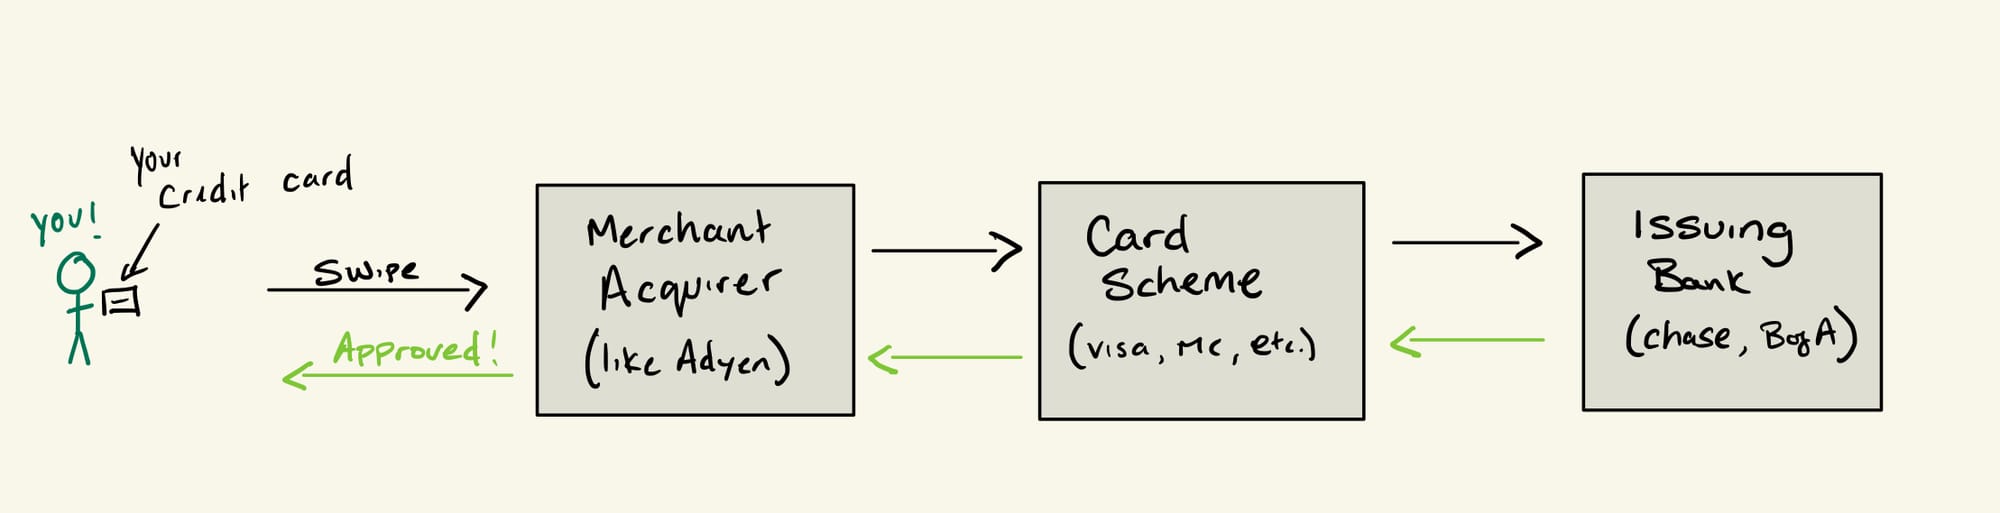 An illustration of the payment path